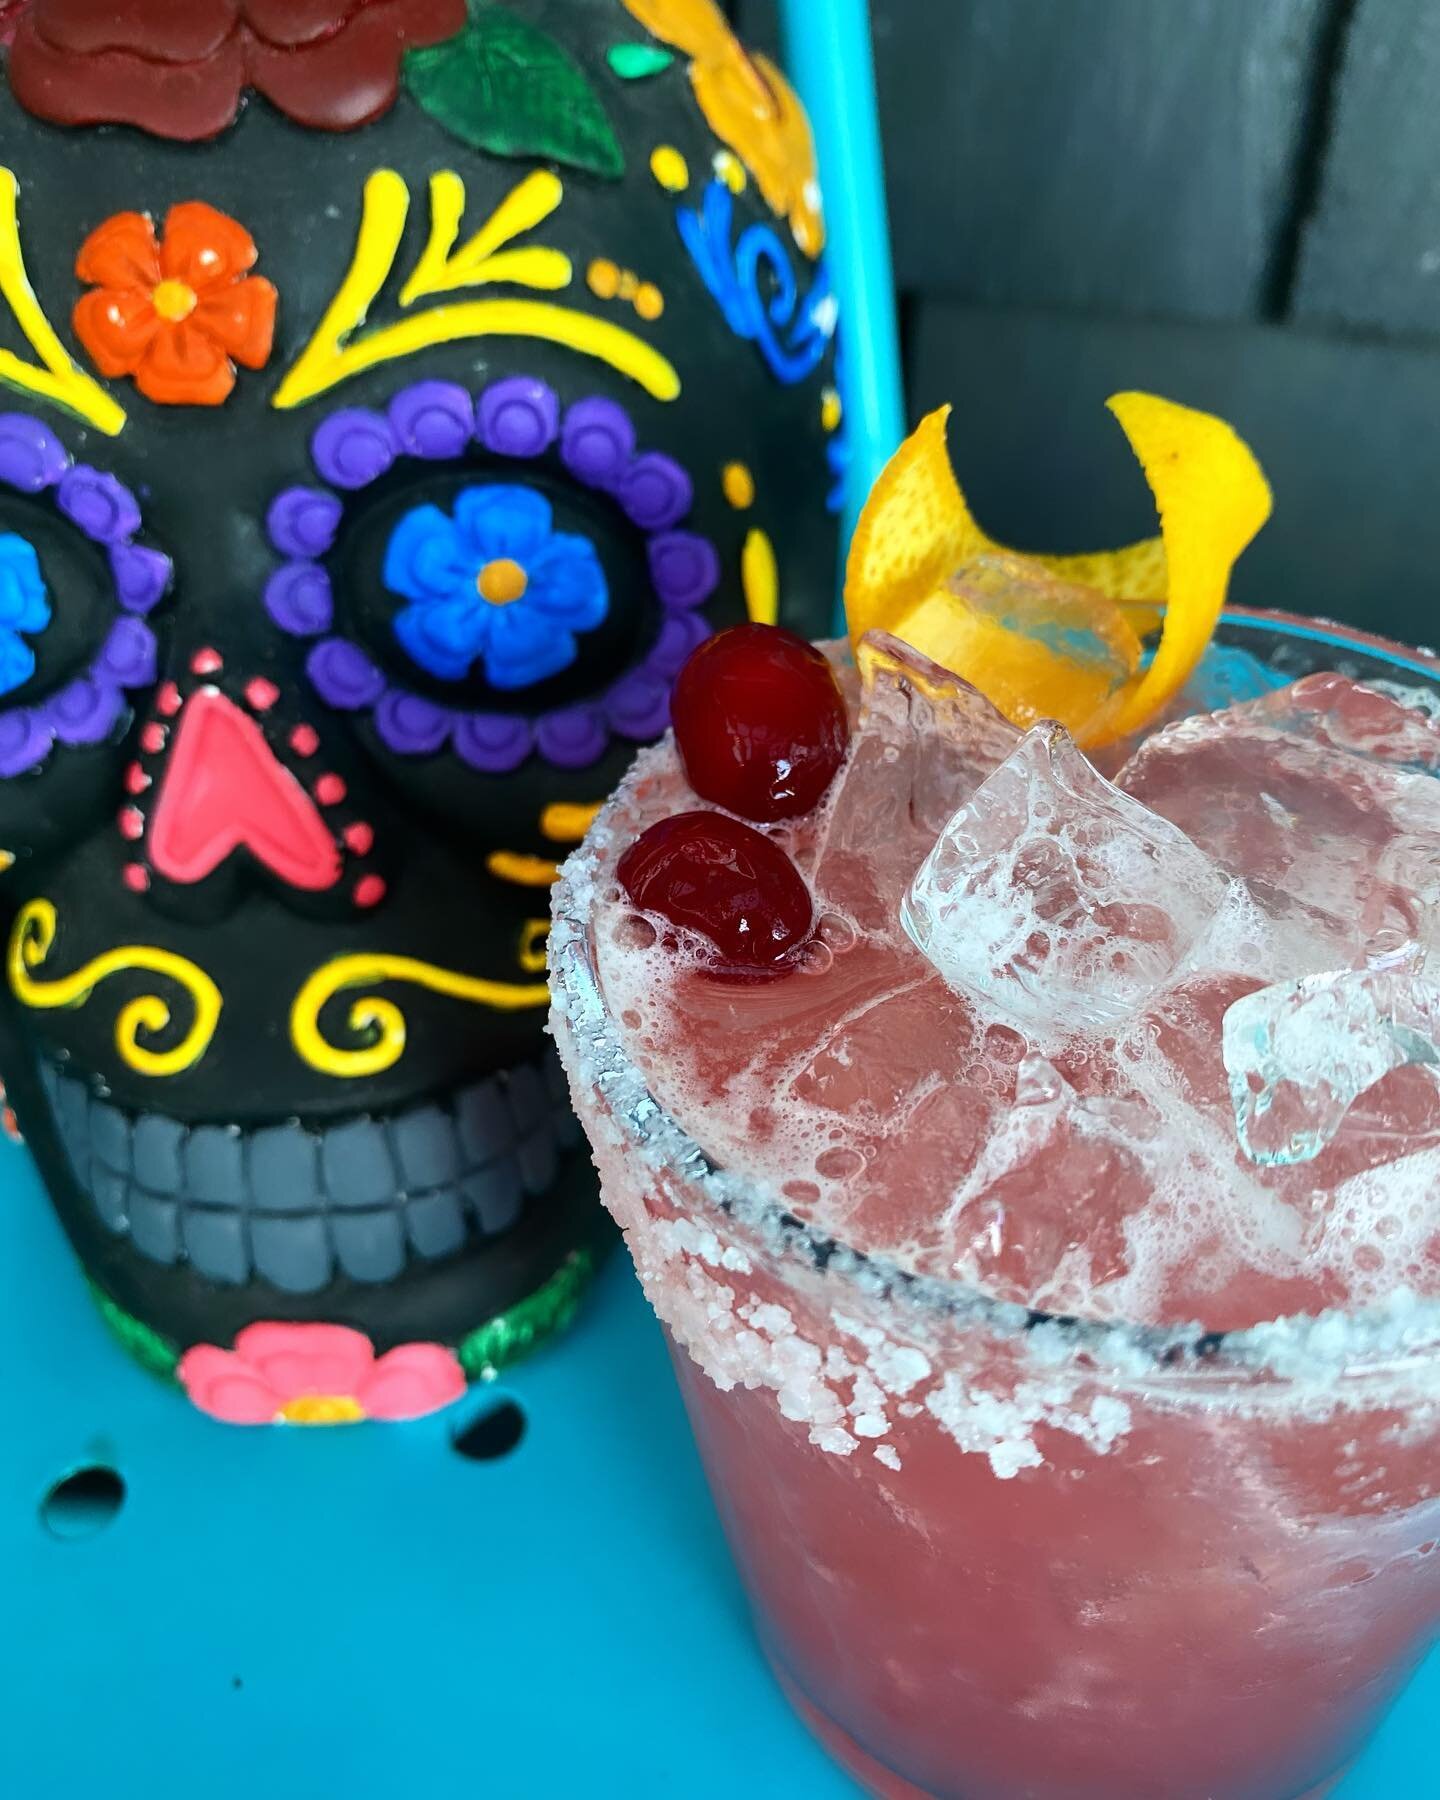 We are Margarita Monday&rsquo;ing with this Autumn Spiced Cranberry Margarita. Start your week out right with this seasonal kiss sip. And hello&hellip; Have you heard? Margarita Monday means $3 off our Classic Lime Margie&rsquo;s Margarita now instea